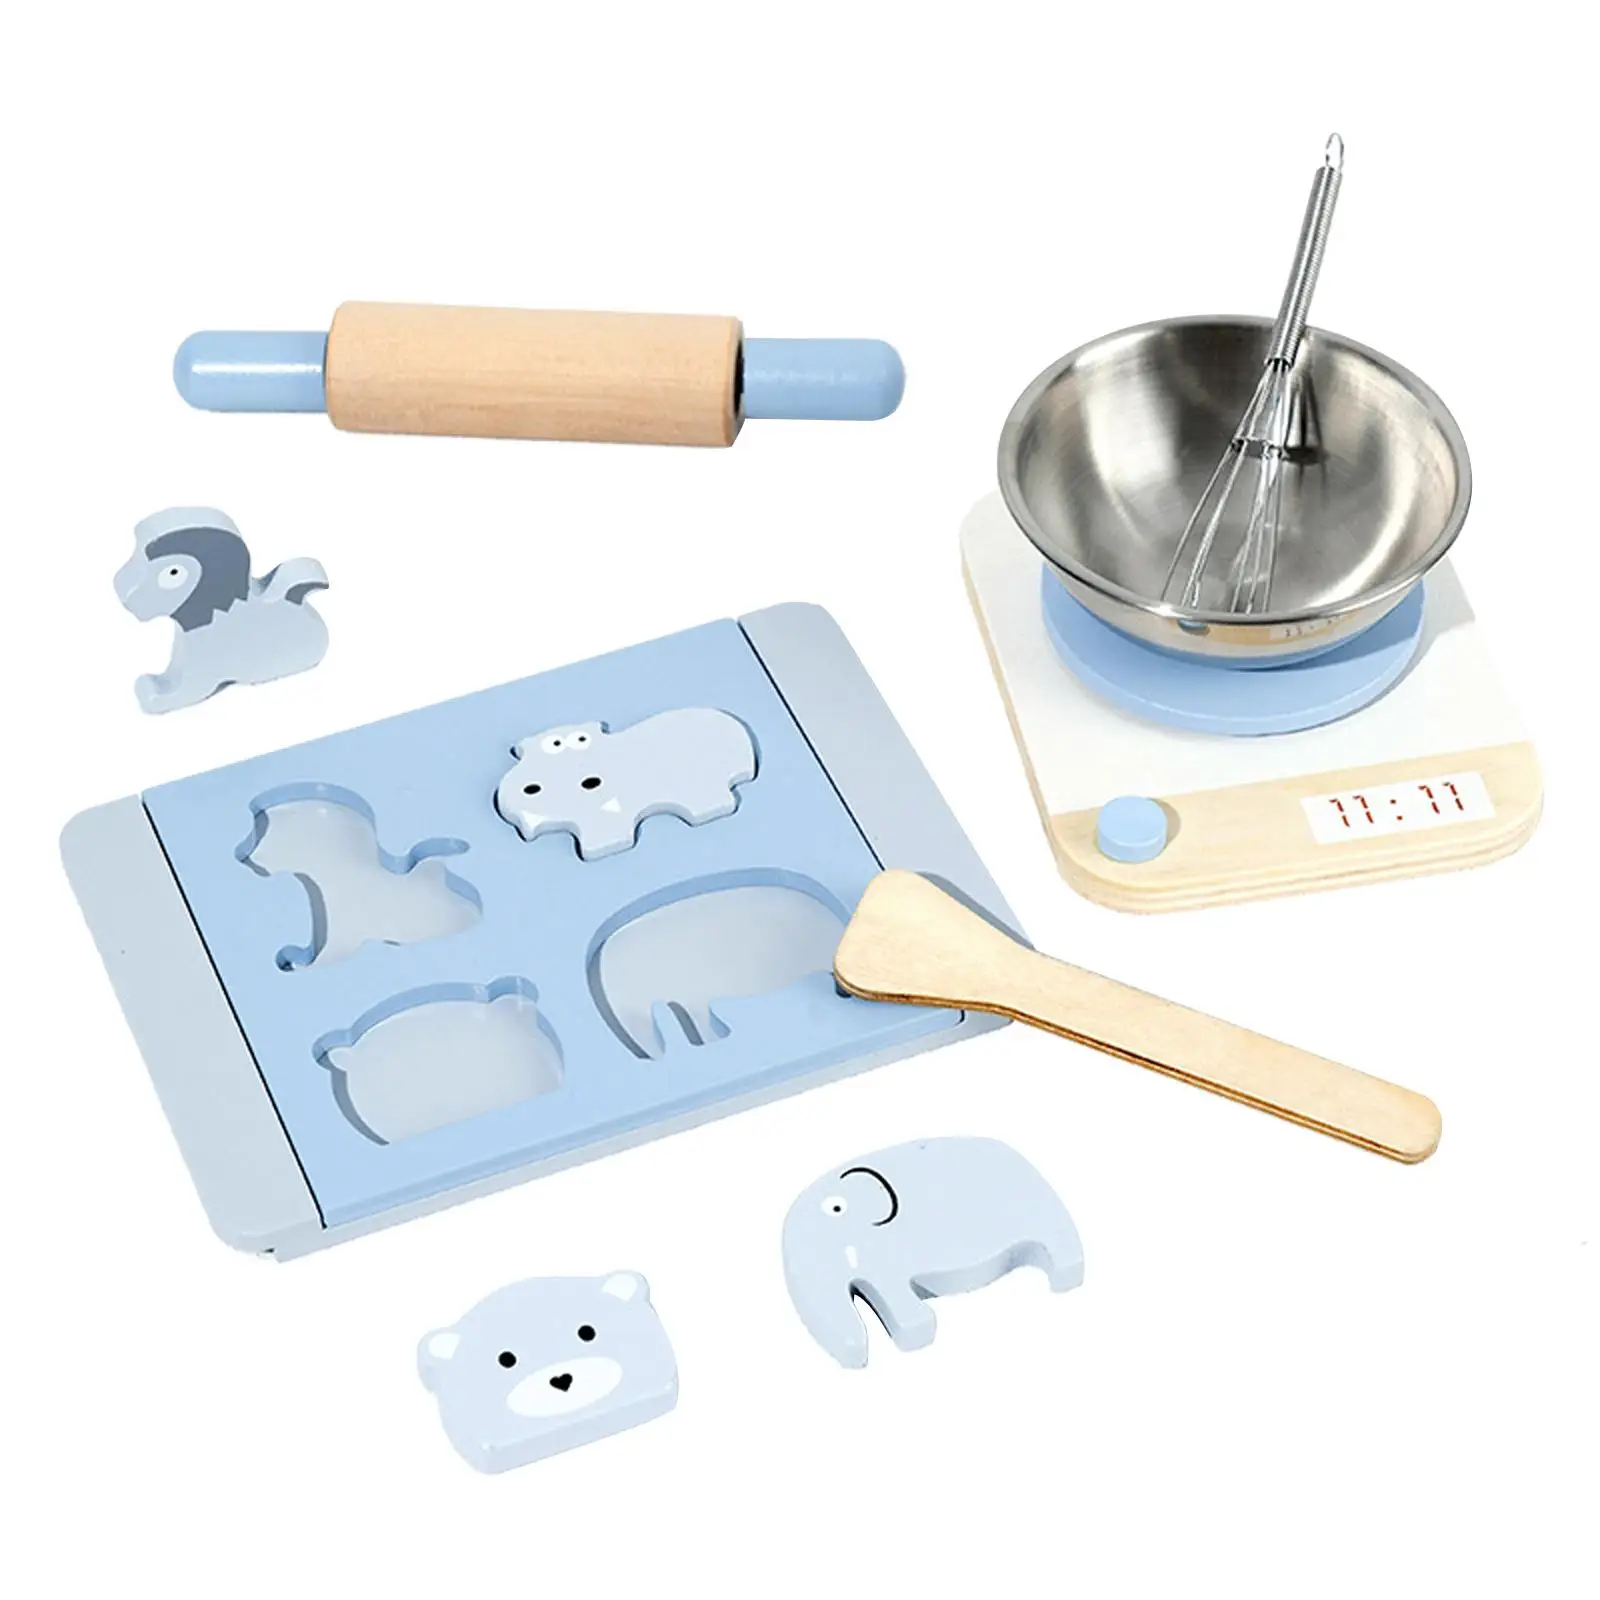 Simulation Food Pretend Play Baking Machine Toy Hands-On Ability Accessories Educational Role Play Biscuit Making for Toddlers